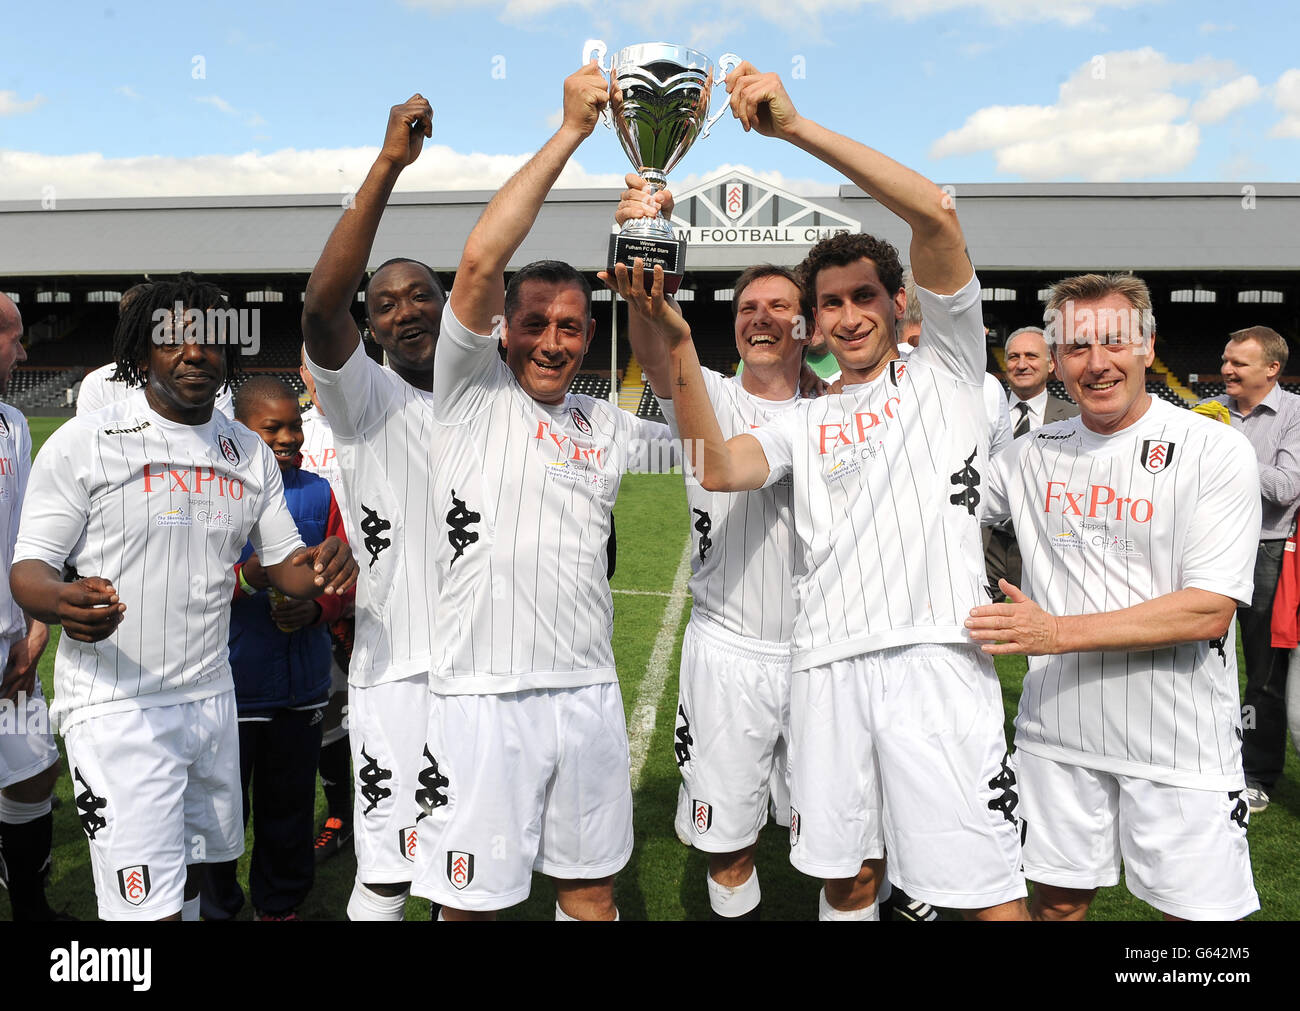 Soccer - Charity All Star Match - Fulham v Sealand - Craven Cottage. Fulham's Captain, All Stars Karim Fayed (2nd right) lifts the Shooting Stars Chase Cup after victory over the Sealand All Stars. Stock Photo